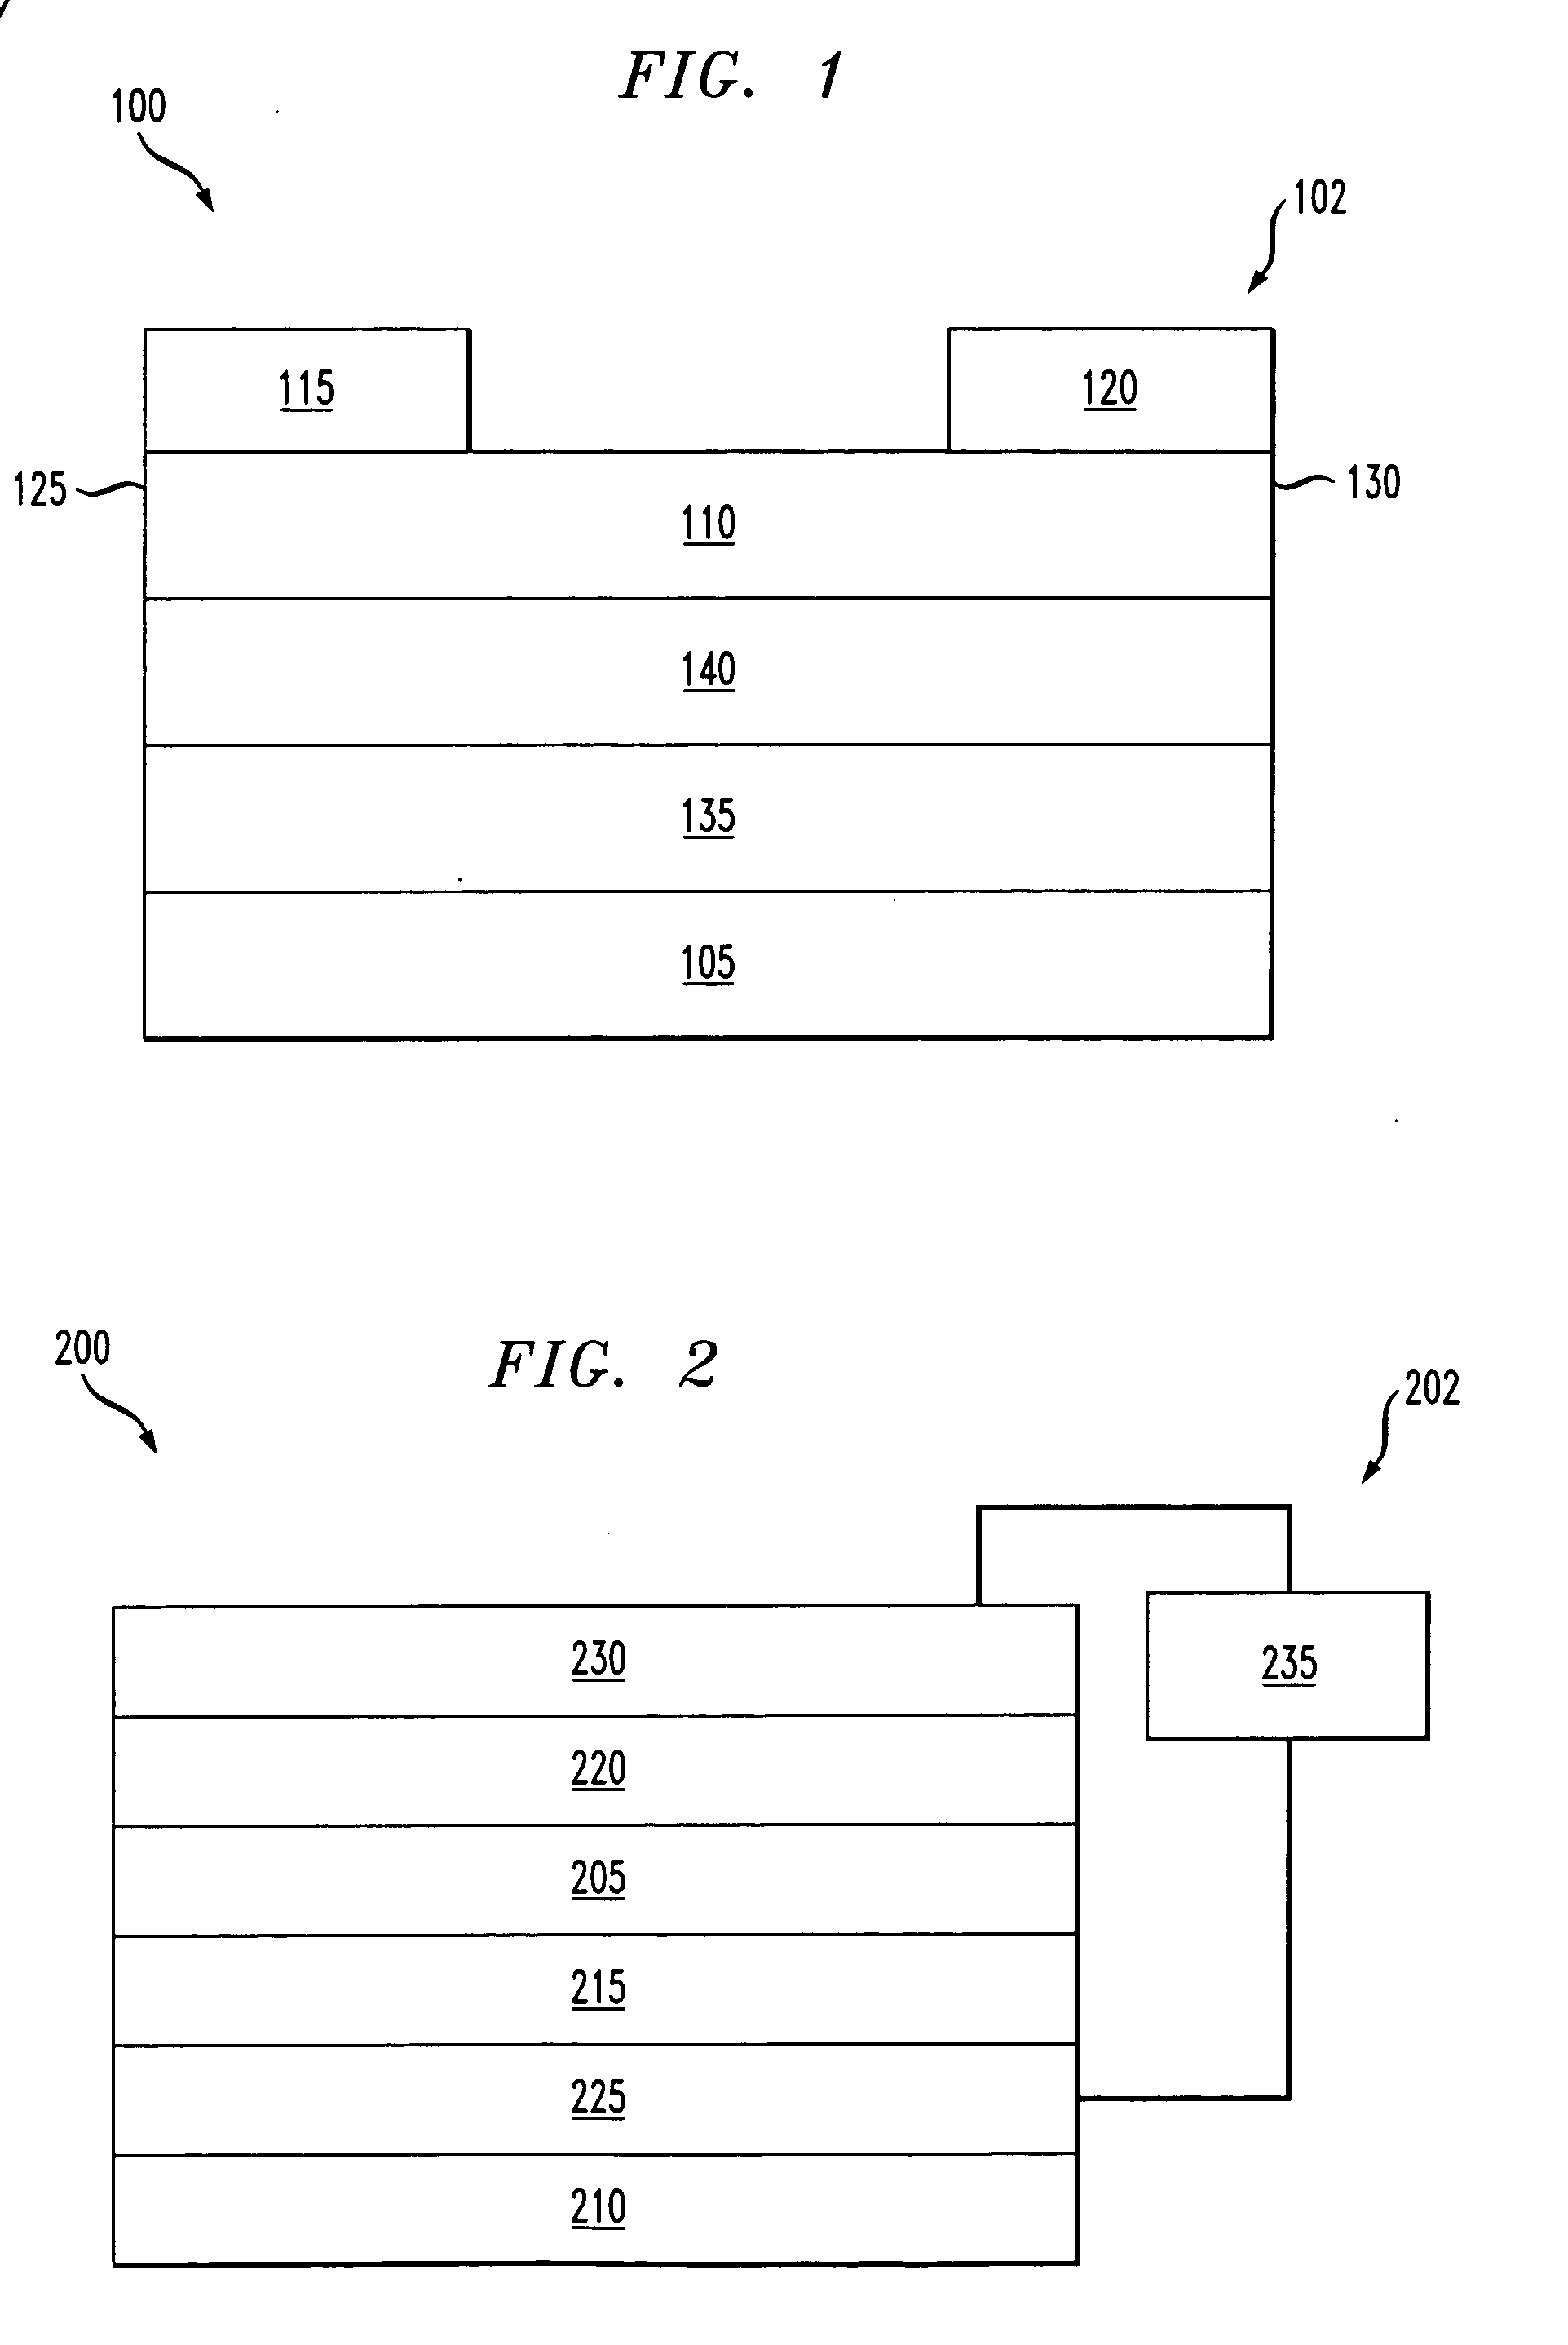 Acene compositions and an apparatus having such compositions